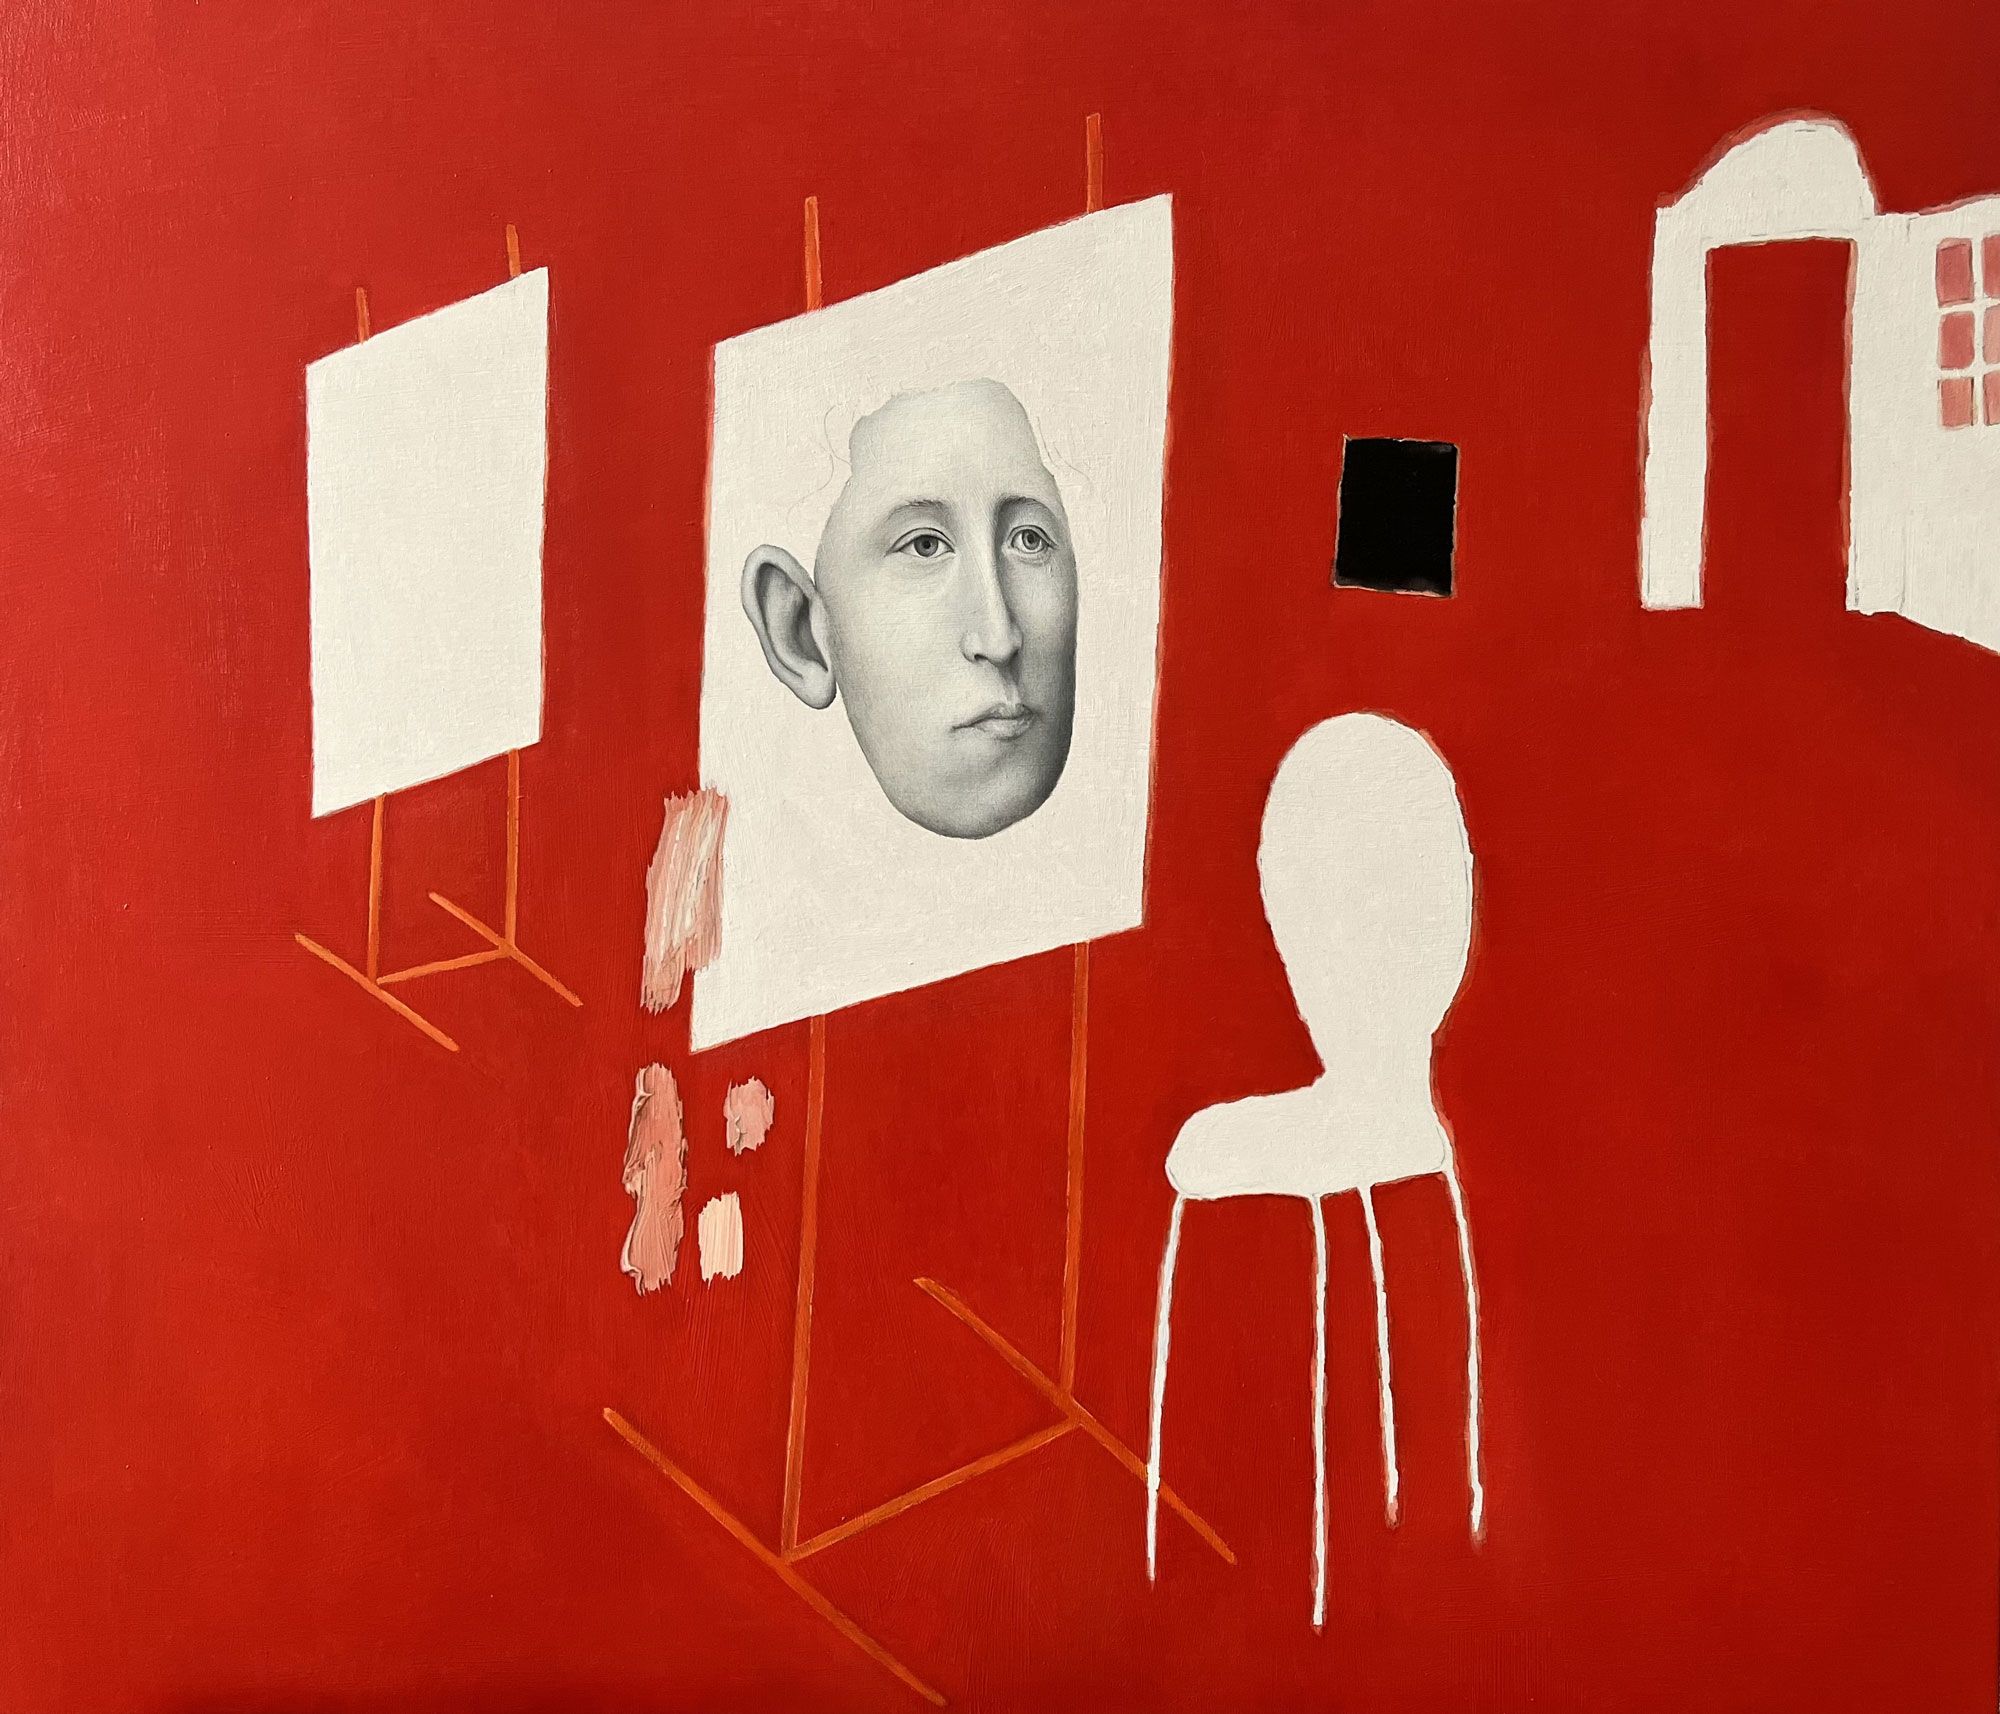 Mark Alexander's oil on canvas: vivid red room with monochrome portrait, white easel, and abstract elements.